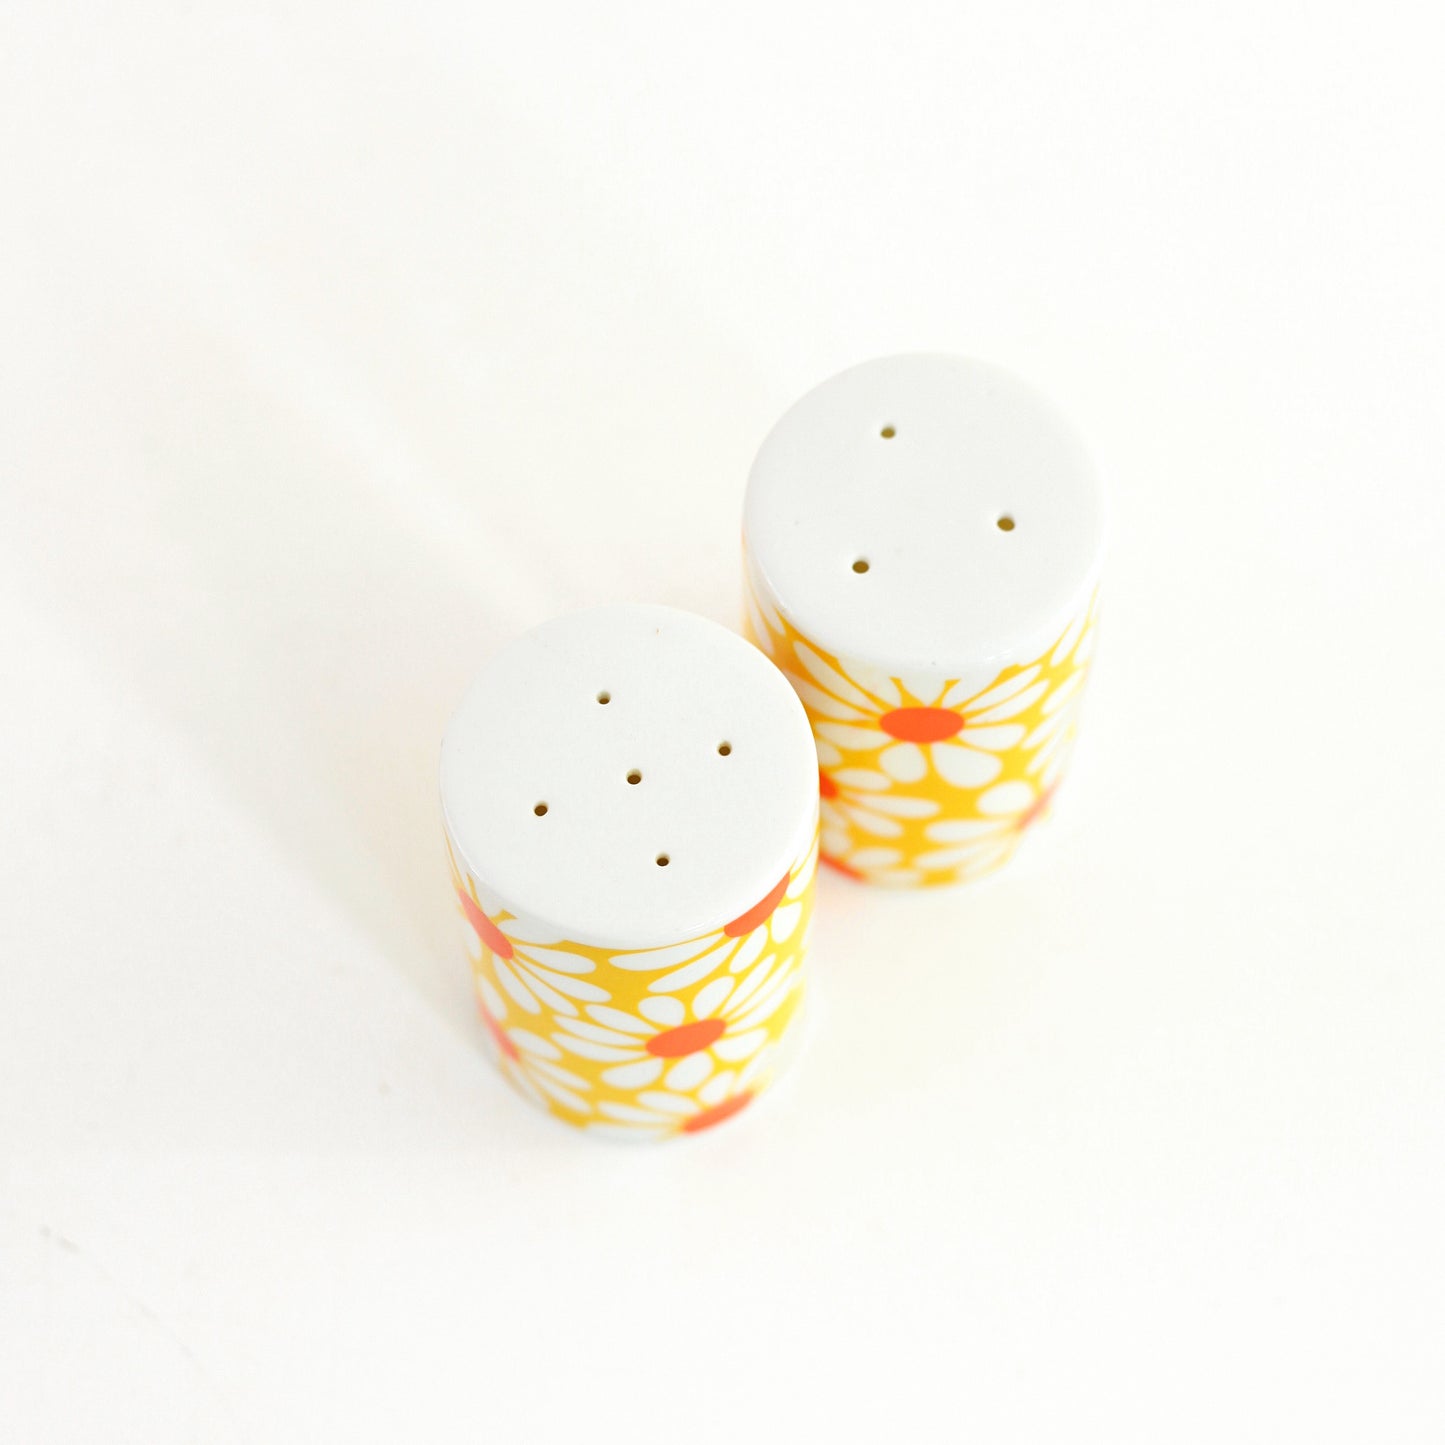 SOLD - Vintage 1960s Daisy Flower Salt and Pepper Shakers